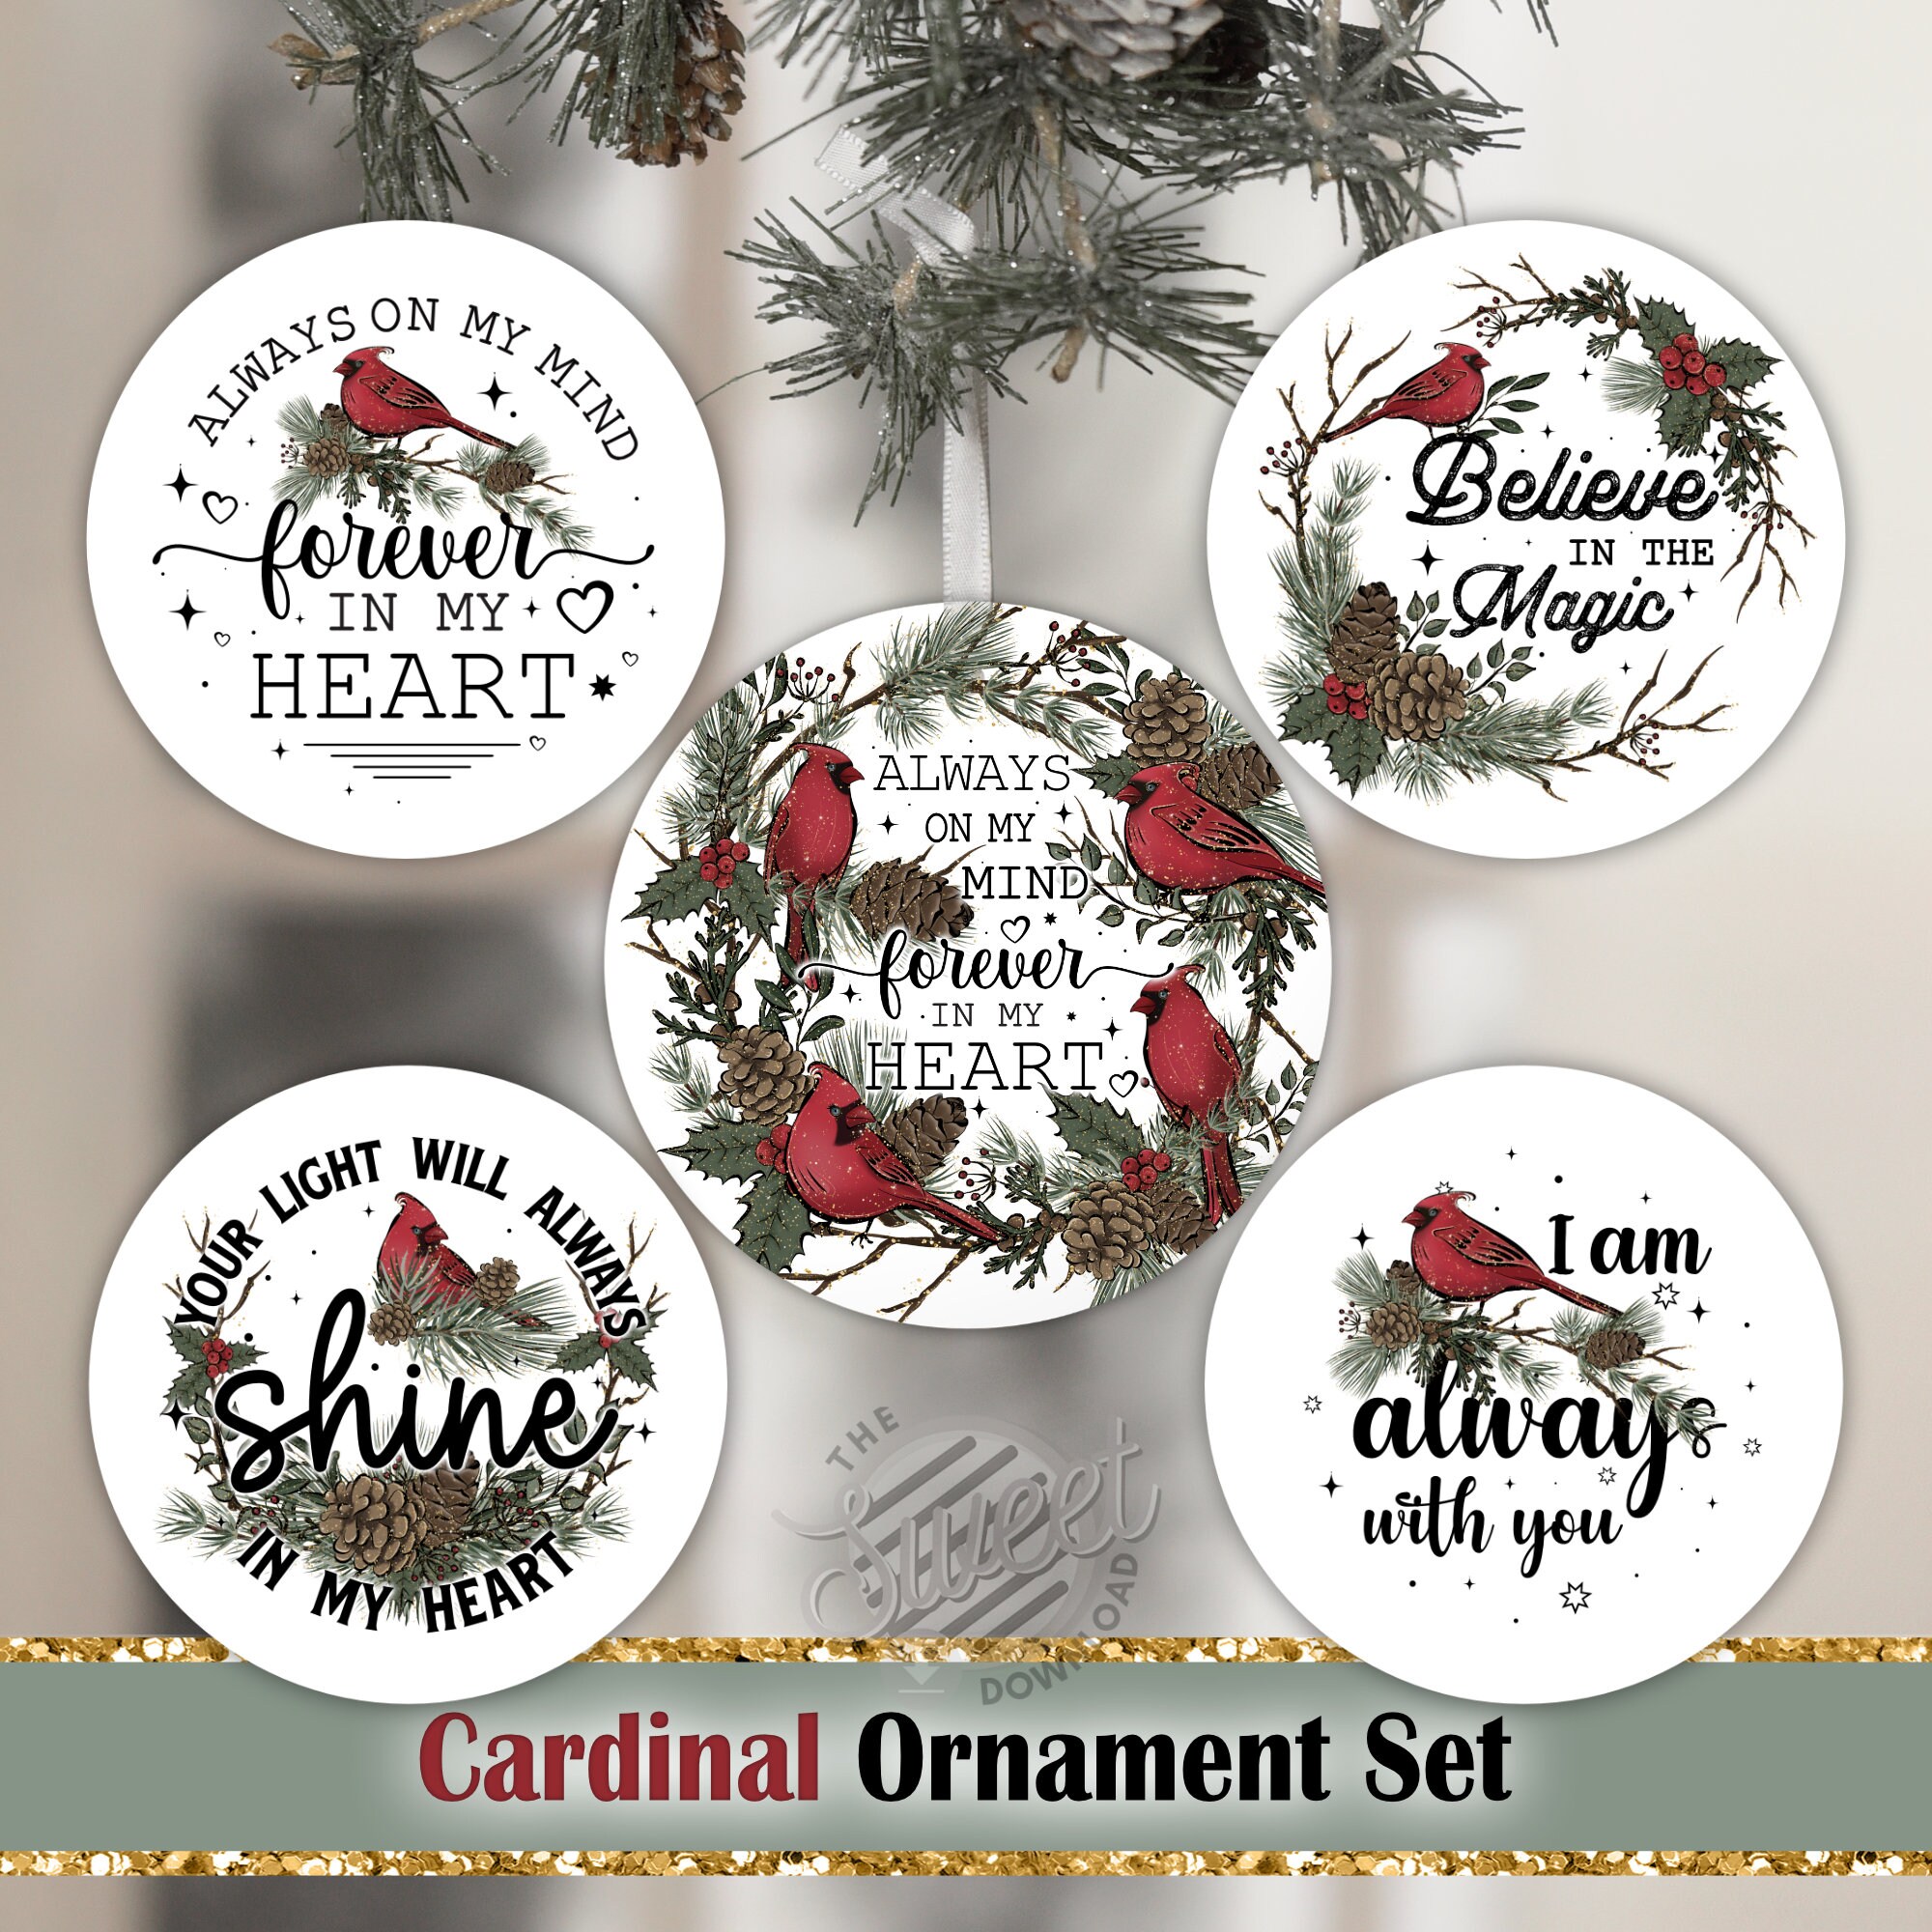 Light Up Round sublimation Ornaments – SS Vinyl, Sublimation, and More